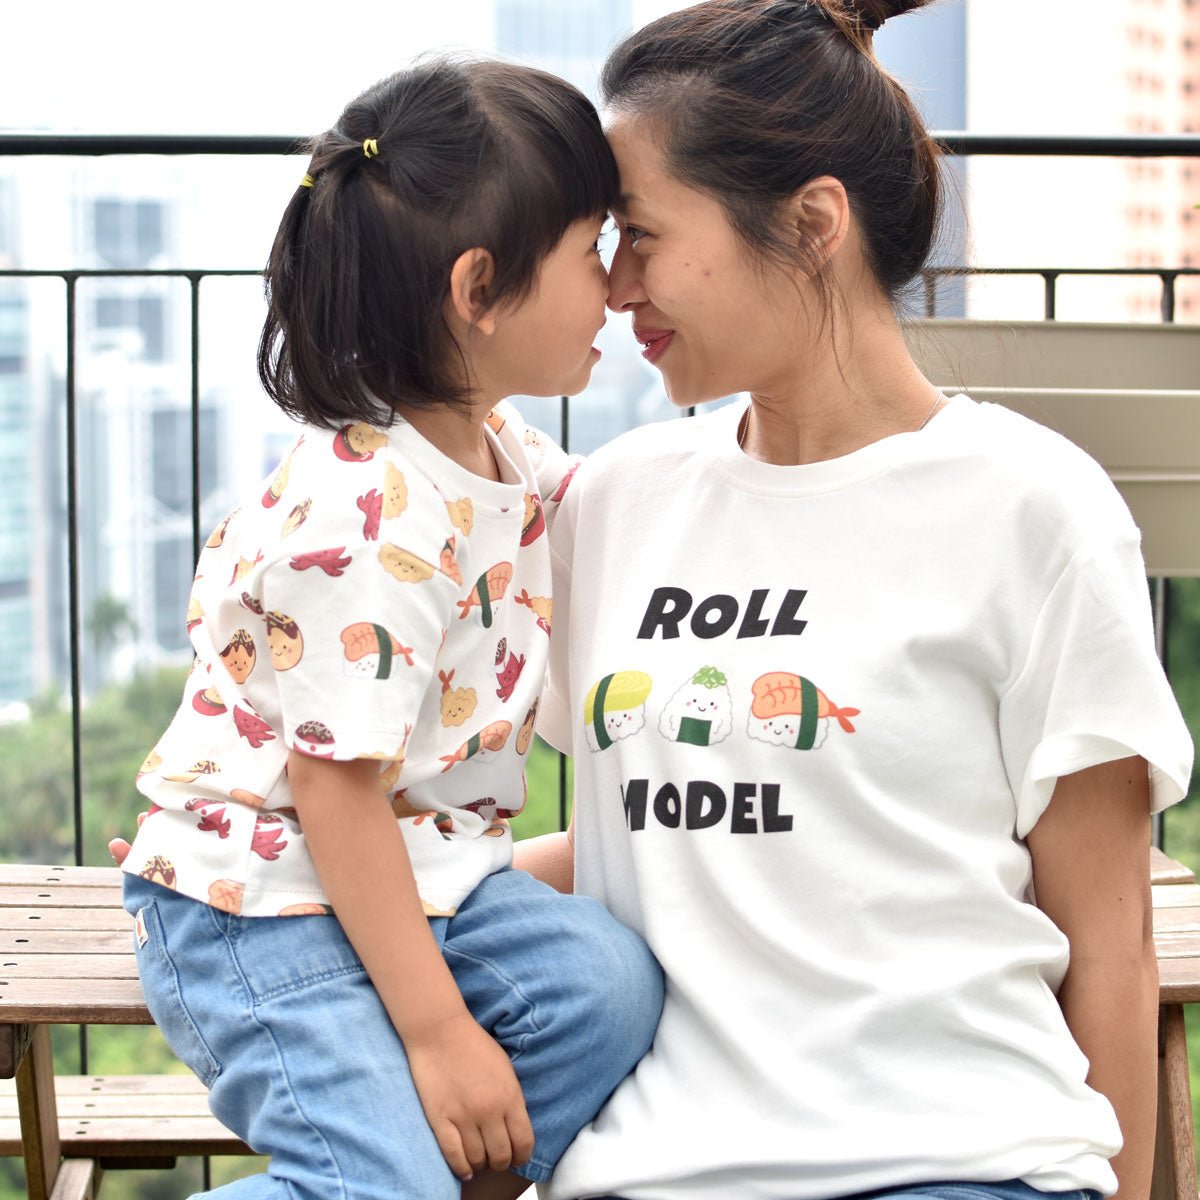 the wee bean organic cotton super soft mommy and me twinning matching t-shirts adult women teen t-shirt in sushi roll model takoyaki